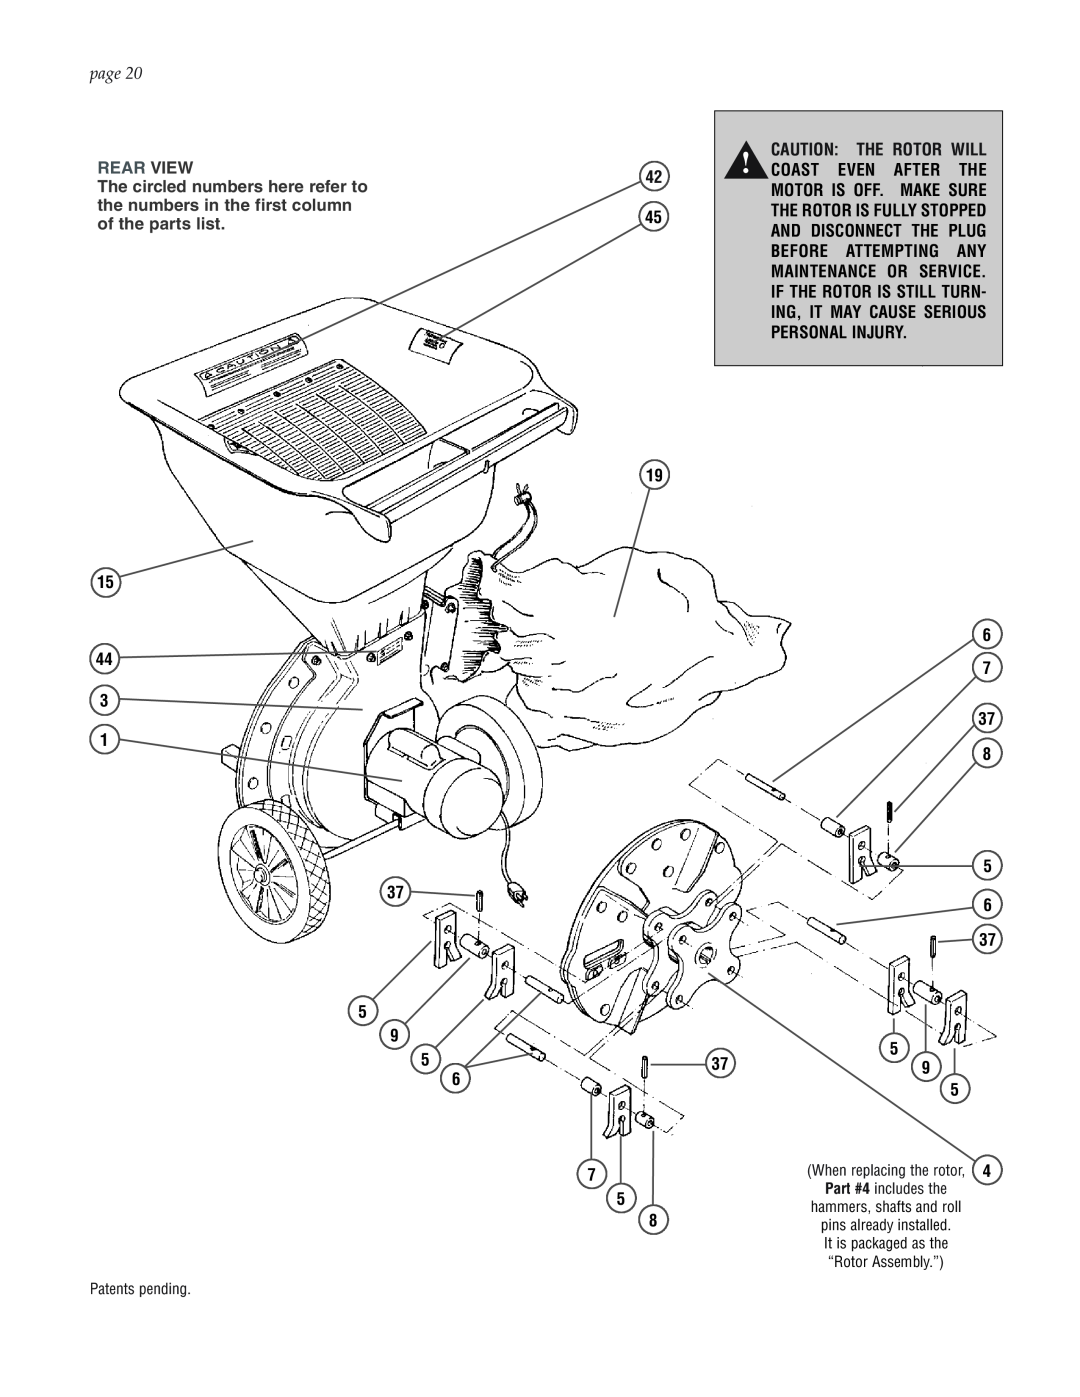 Patriot Products Electric Motors manual Rear View, page 